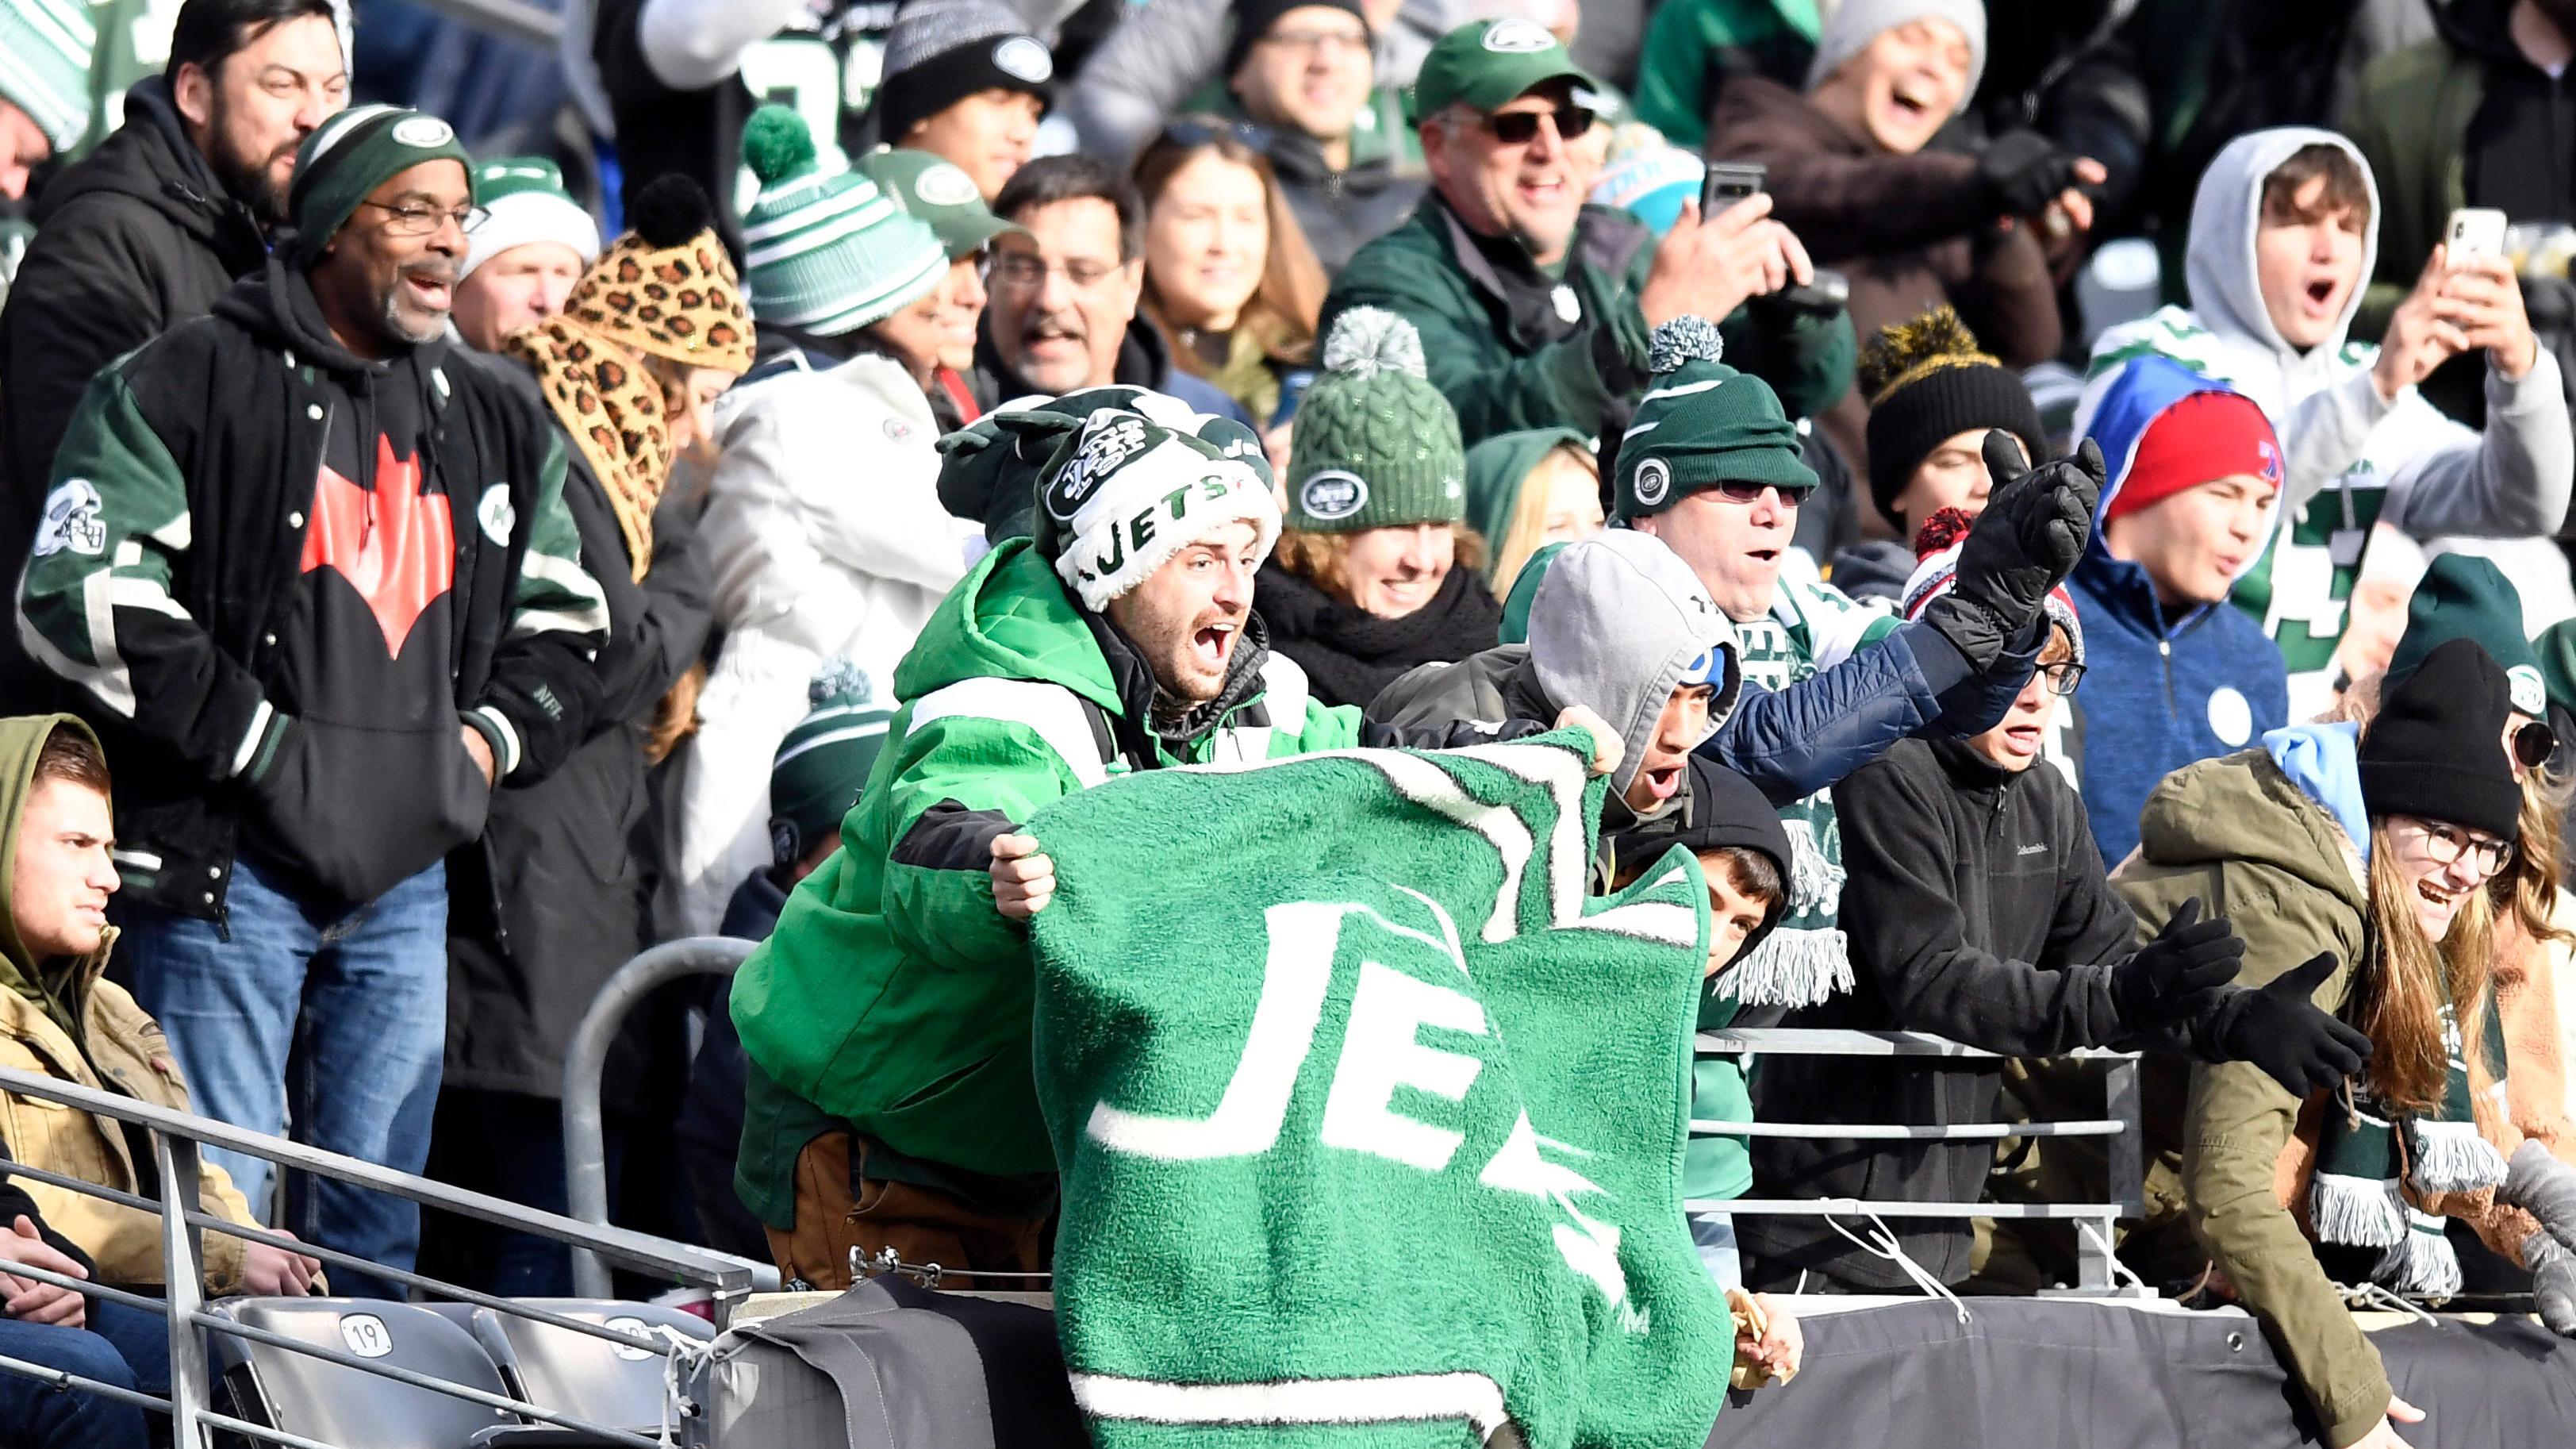 Jets fans celebrate an interception against the Dolphins in the first half of an NFL game on Sunday, Dec. 8, 2019, in East Rutherford. / Danielle Parhizkaran/NorthJersey.com-Imagn Content Services, LLC